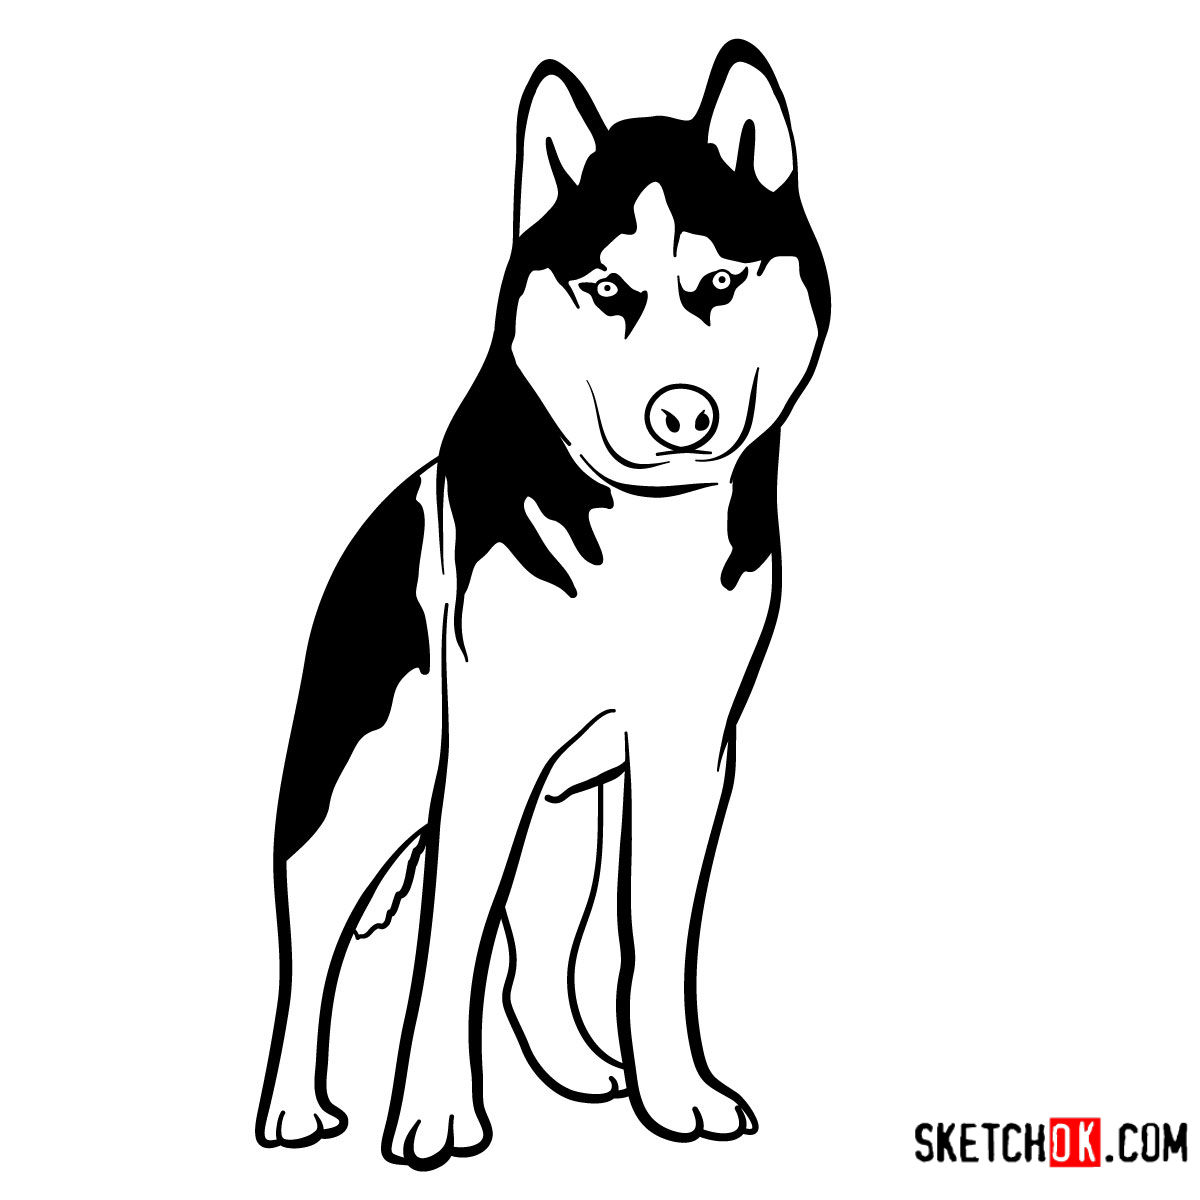 How To Draw The Husky Dog Sketchok Easy Drawing Guides